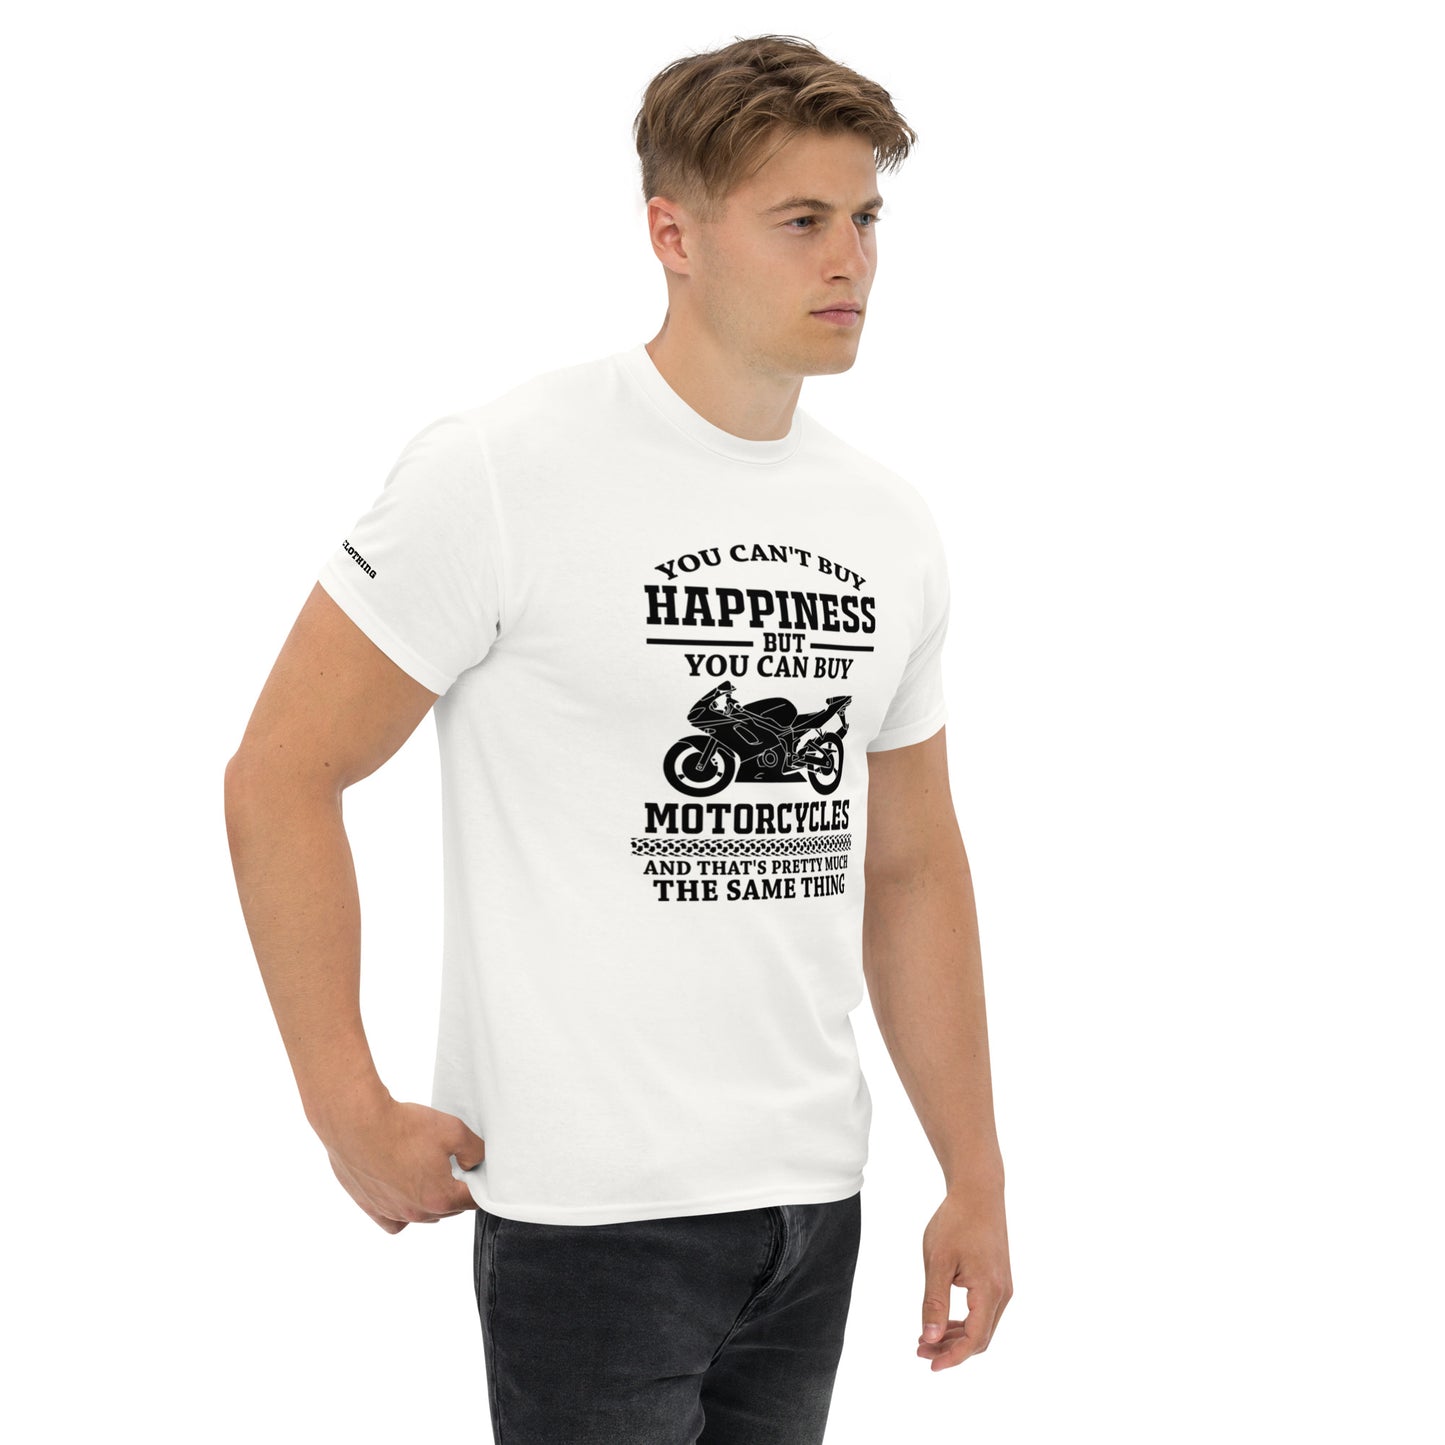 Motorcycles Equals Happiness Tee